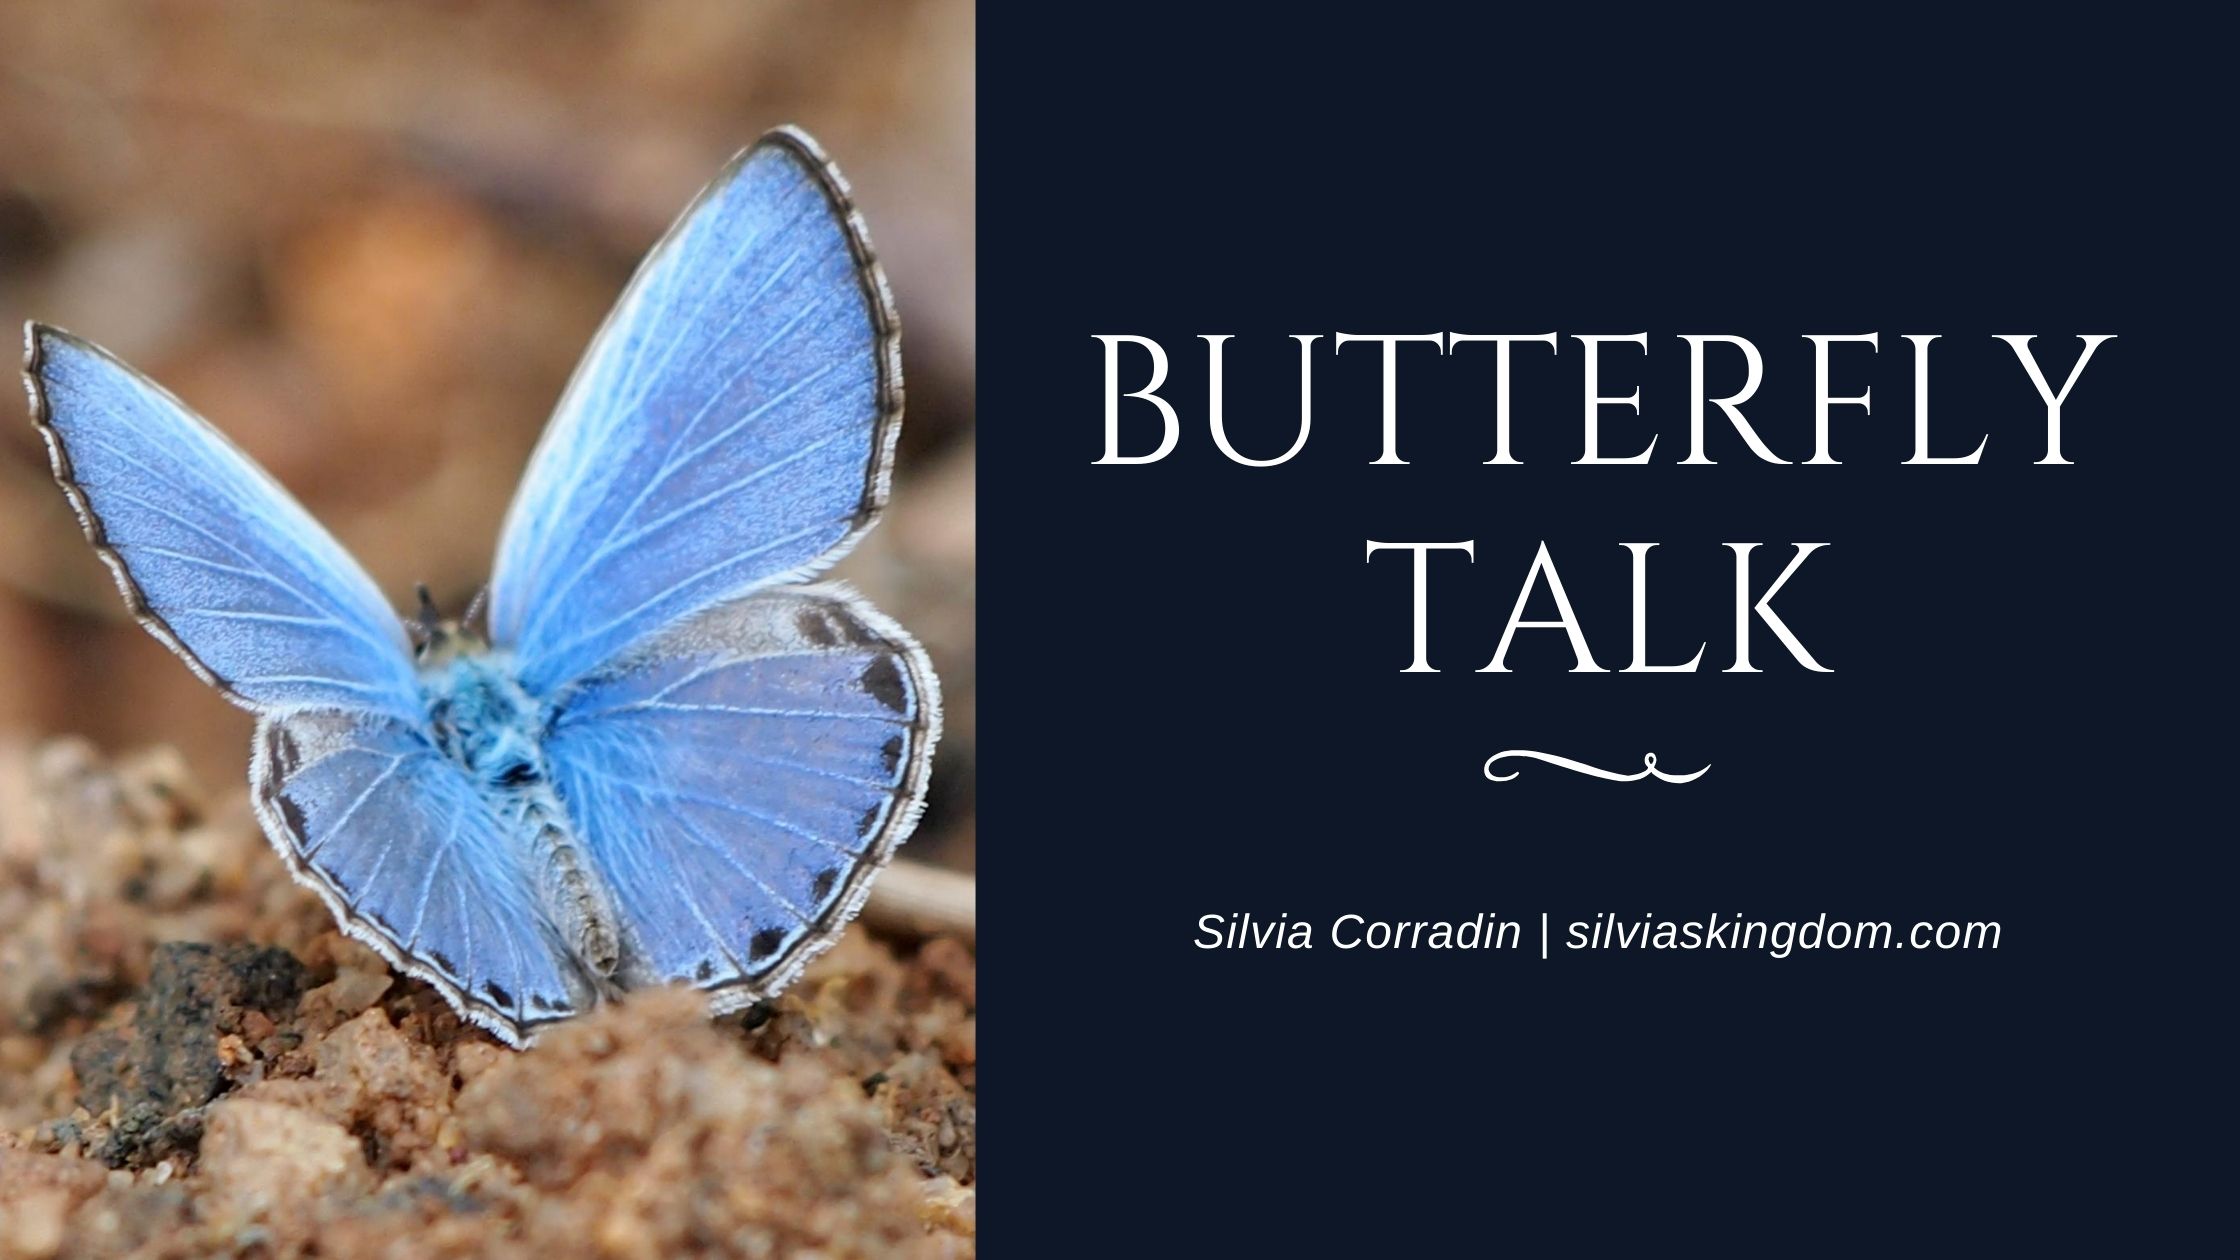 Butterfly Talk Episode 5 - The Healing Power of Humor